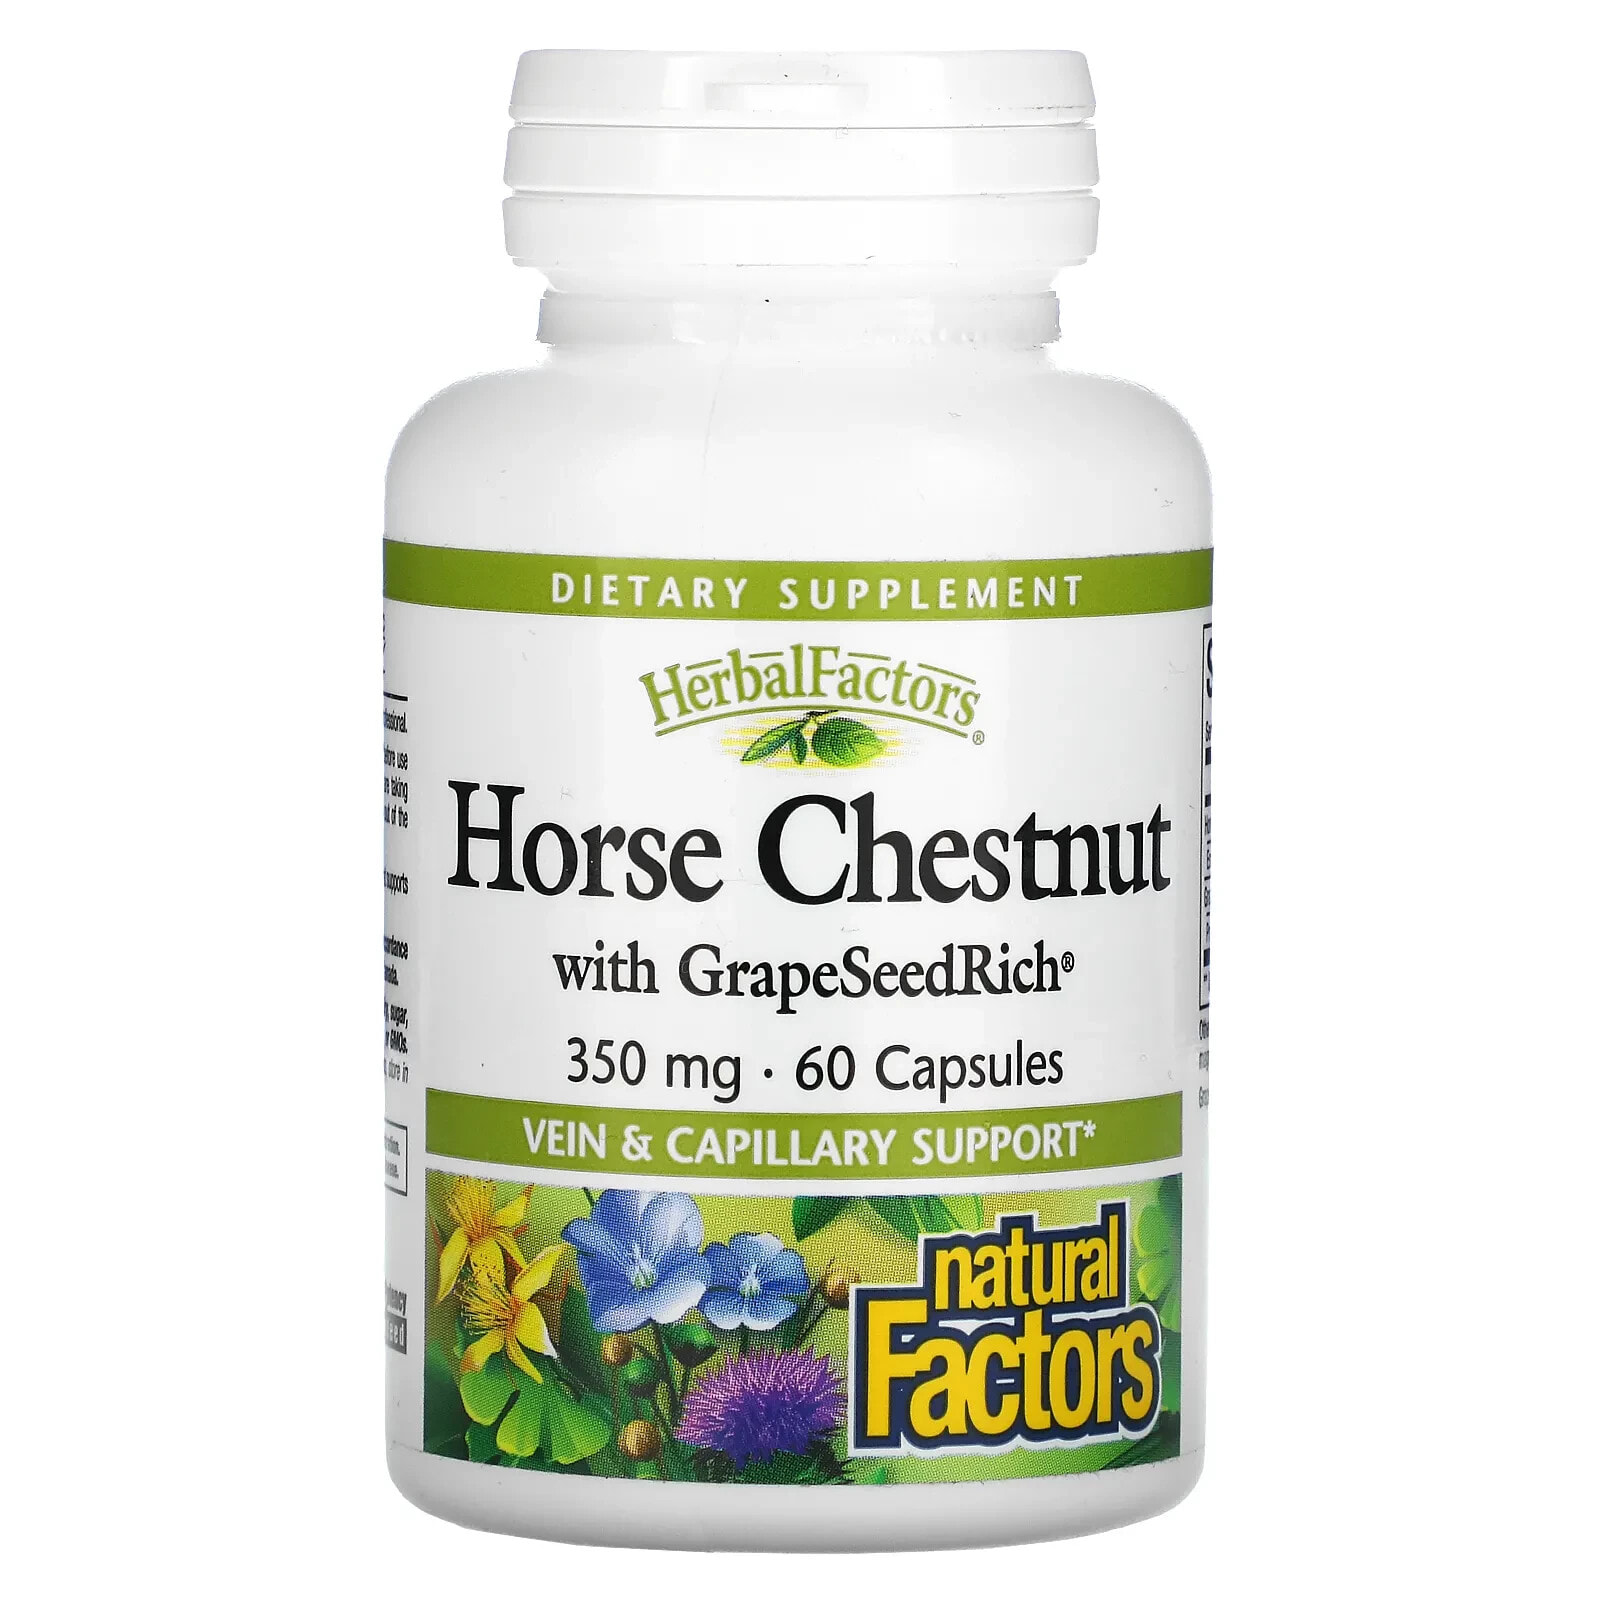 Horse Chestnut with GrapeSeedRich, 350 mg, 60 Capsules